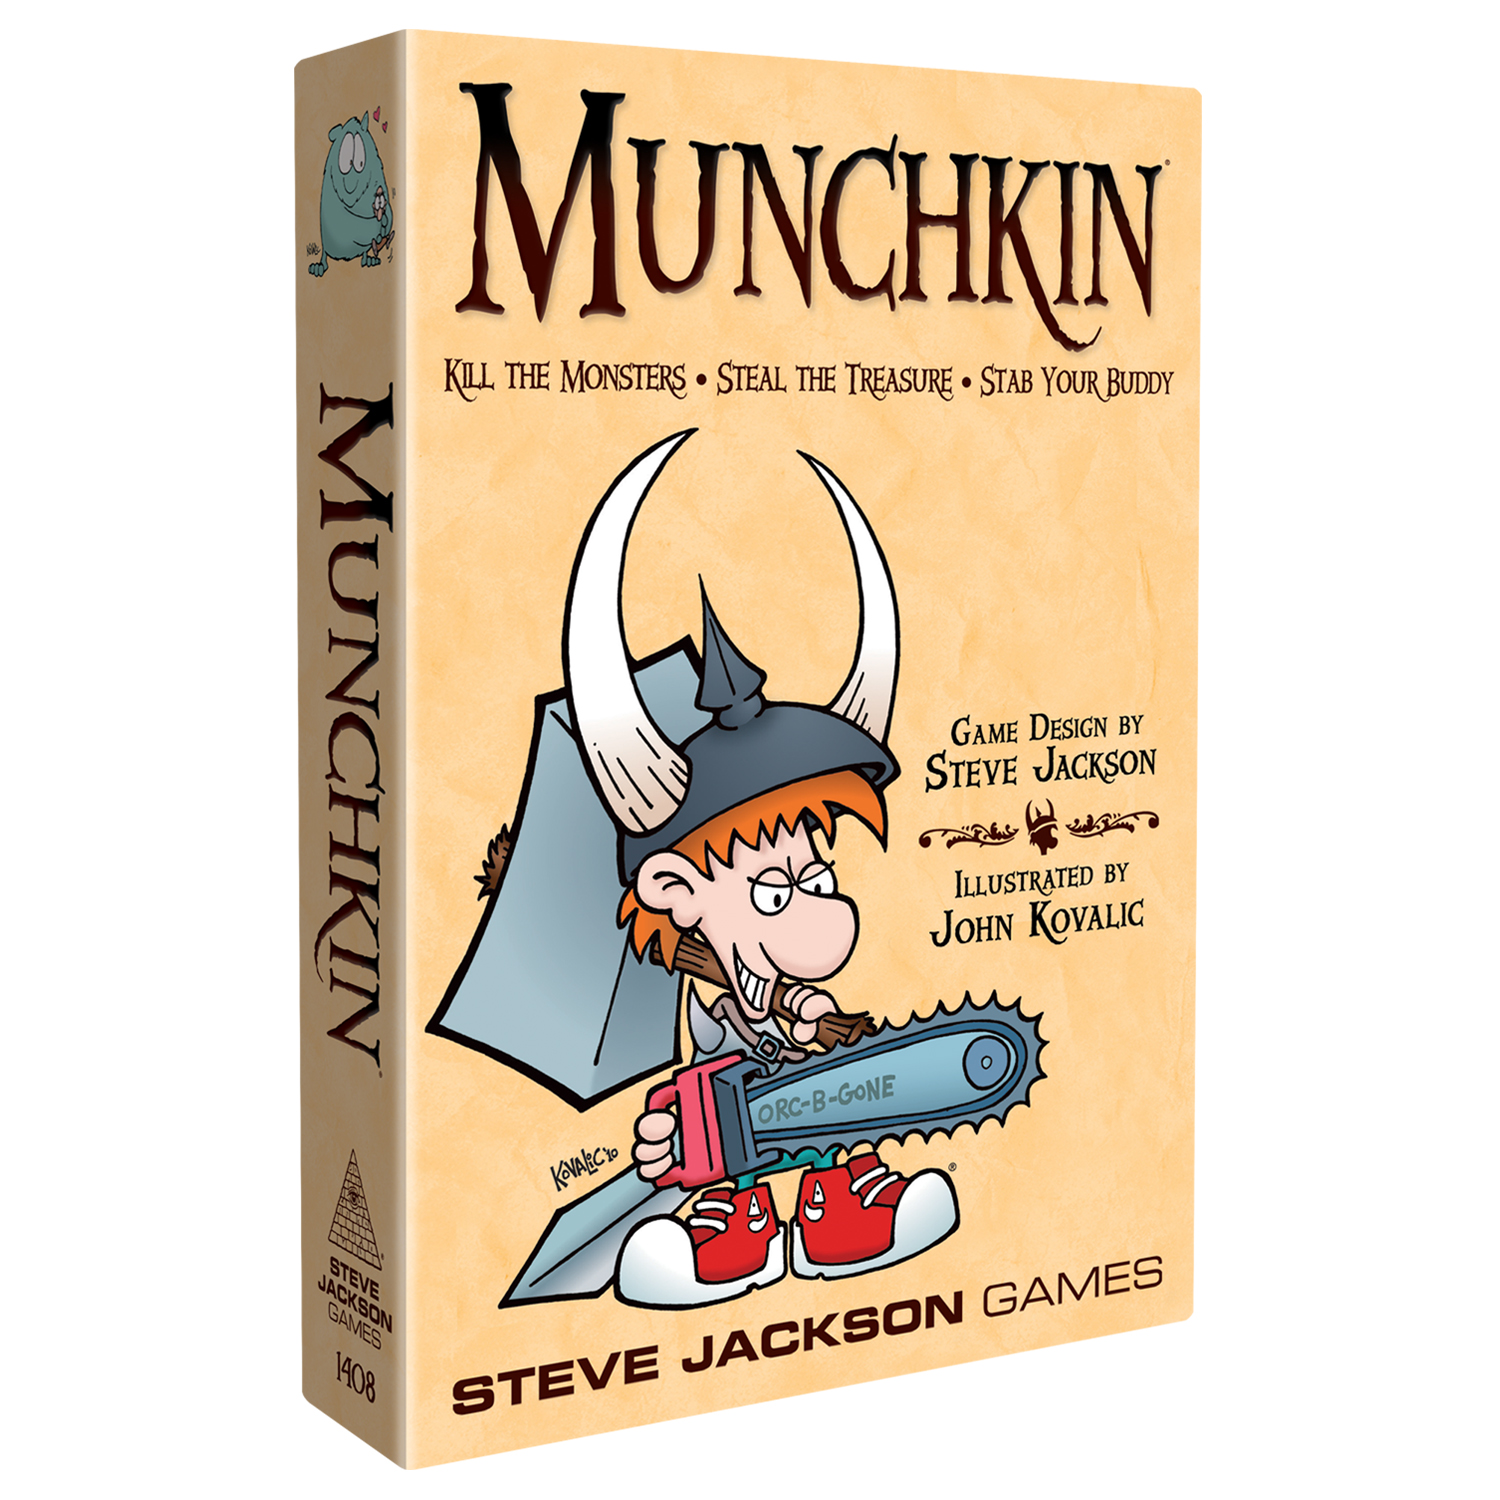 MUNCHKIN GAME BOARD GAMEBOARD LCG CCG PLAYMAT LIVING CARD GAME 4x PIECES